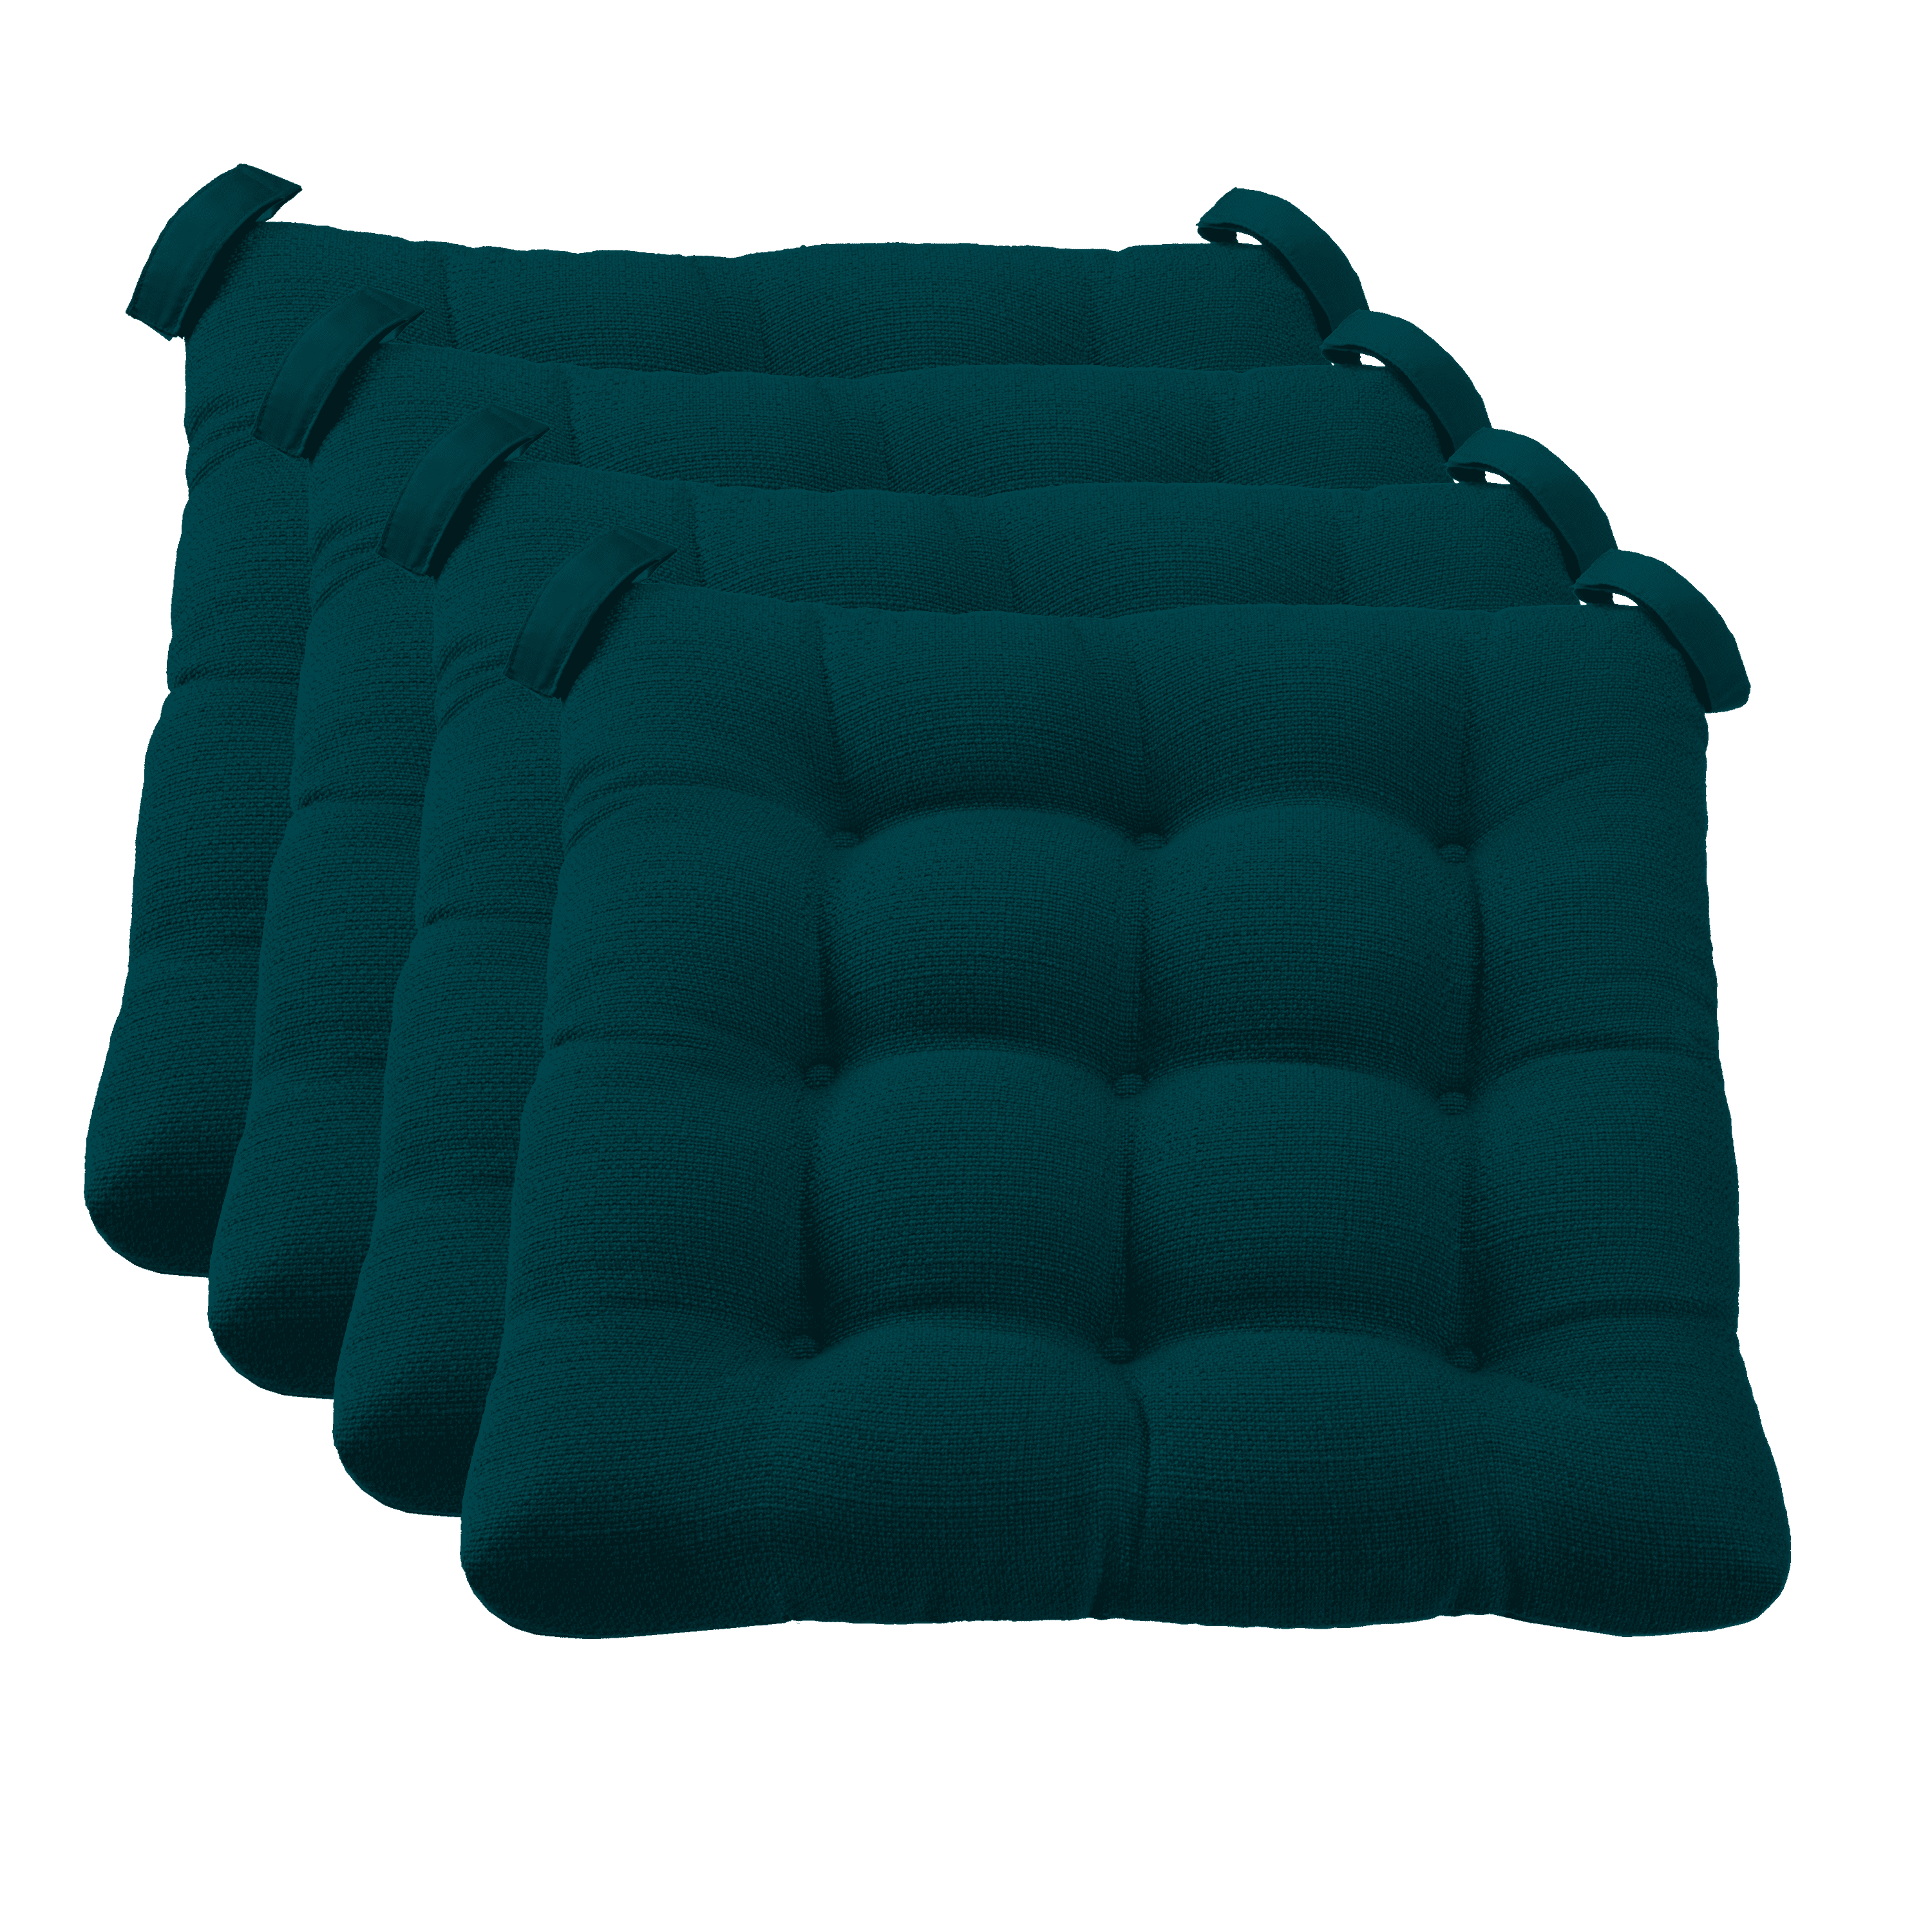 Mainstays Textured Chair Seat Pad (Chair Cushion), Navy Color, 4-Piece Set,  15.5 L x 16 W 